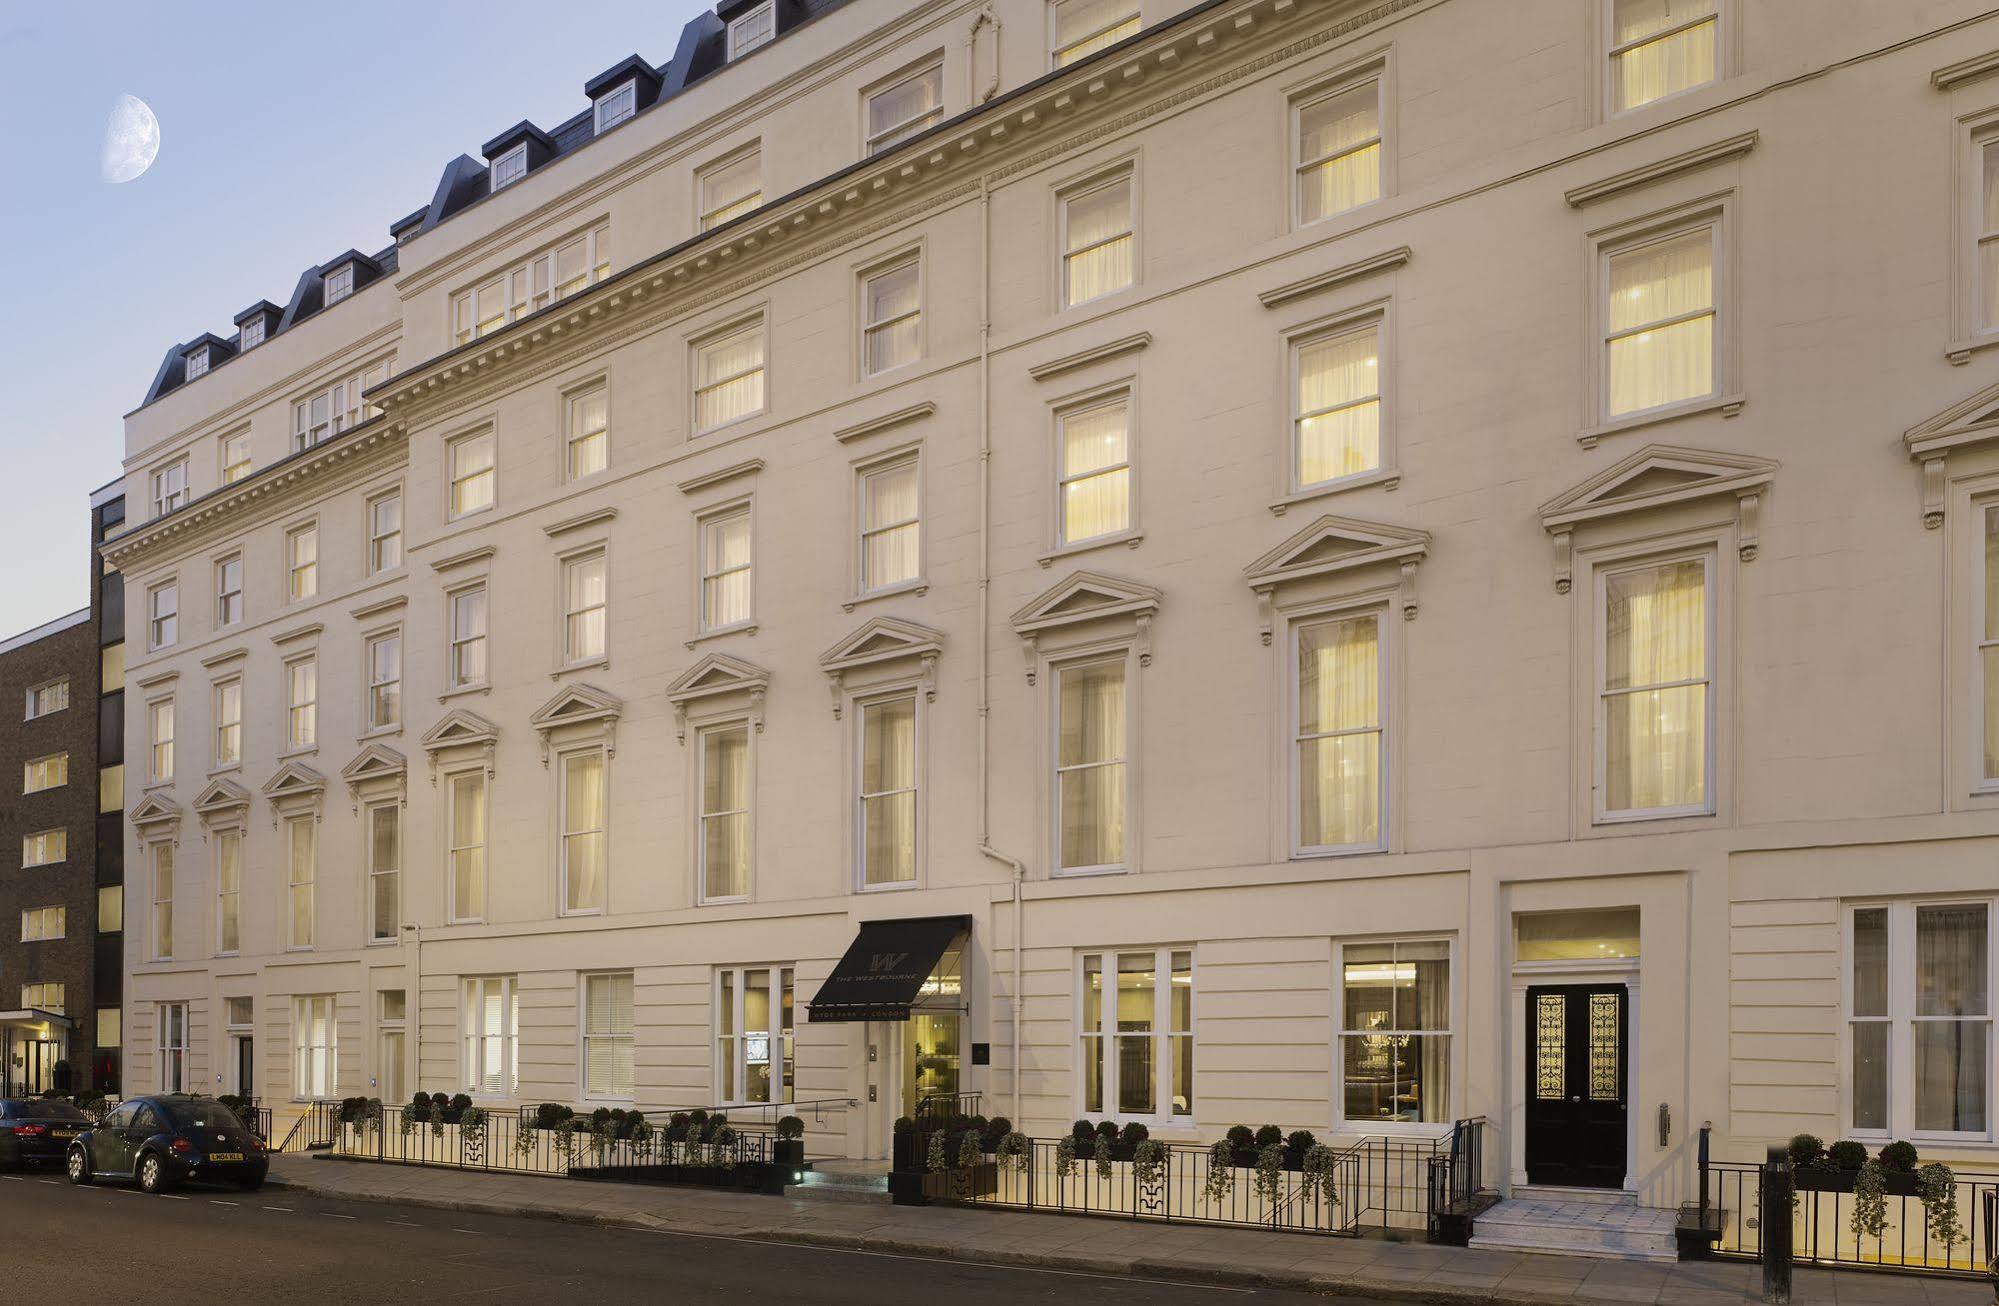 Hotel The Westbourne Hyde Park London Exterior foto